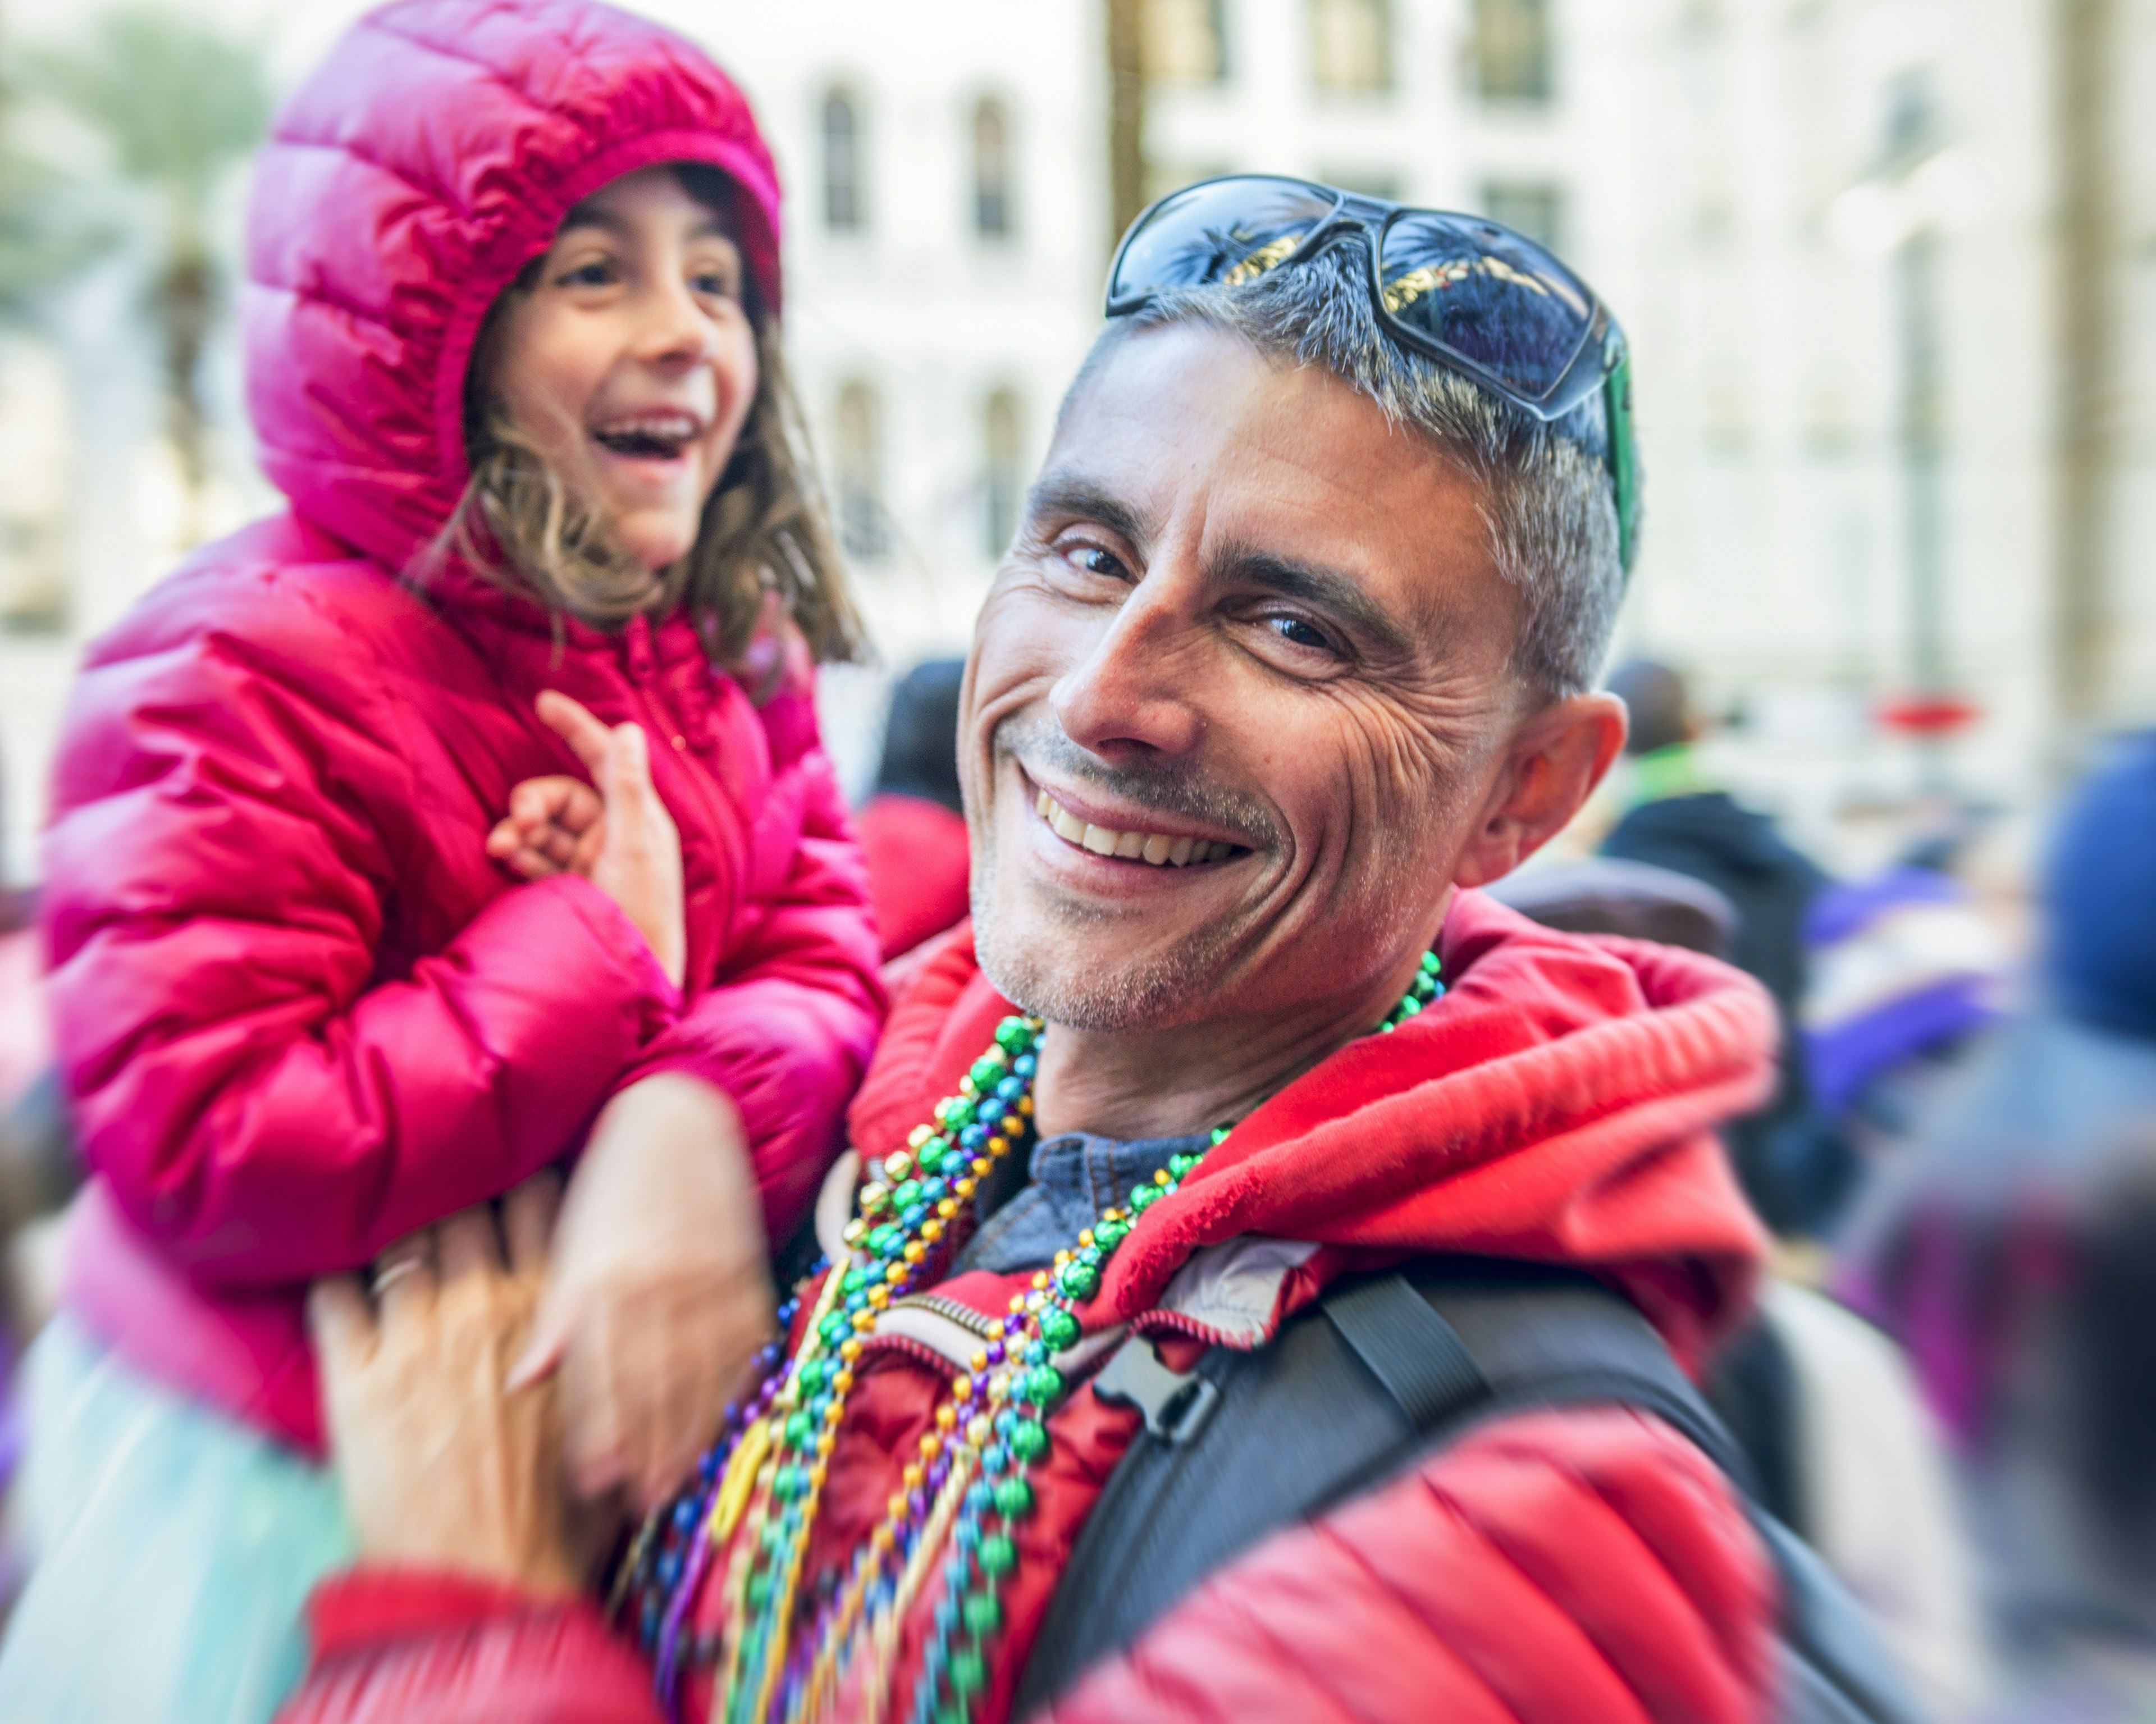 Father and daughter having fun in New Orleans street on Mardi Gras.; Shutterstock ID 517528222; your: ClaireN; gl: 65050; netsuite: Online ed; full: New Orleans with kids
517528222